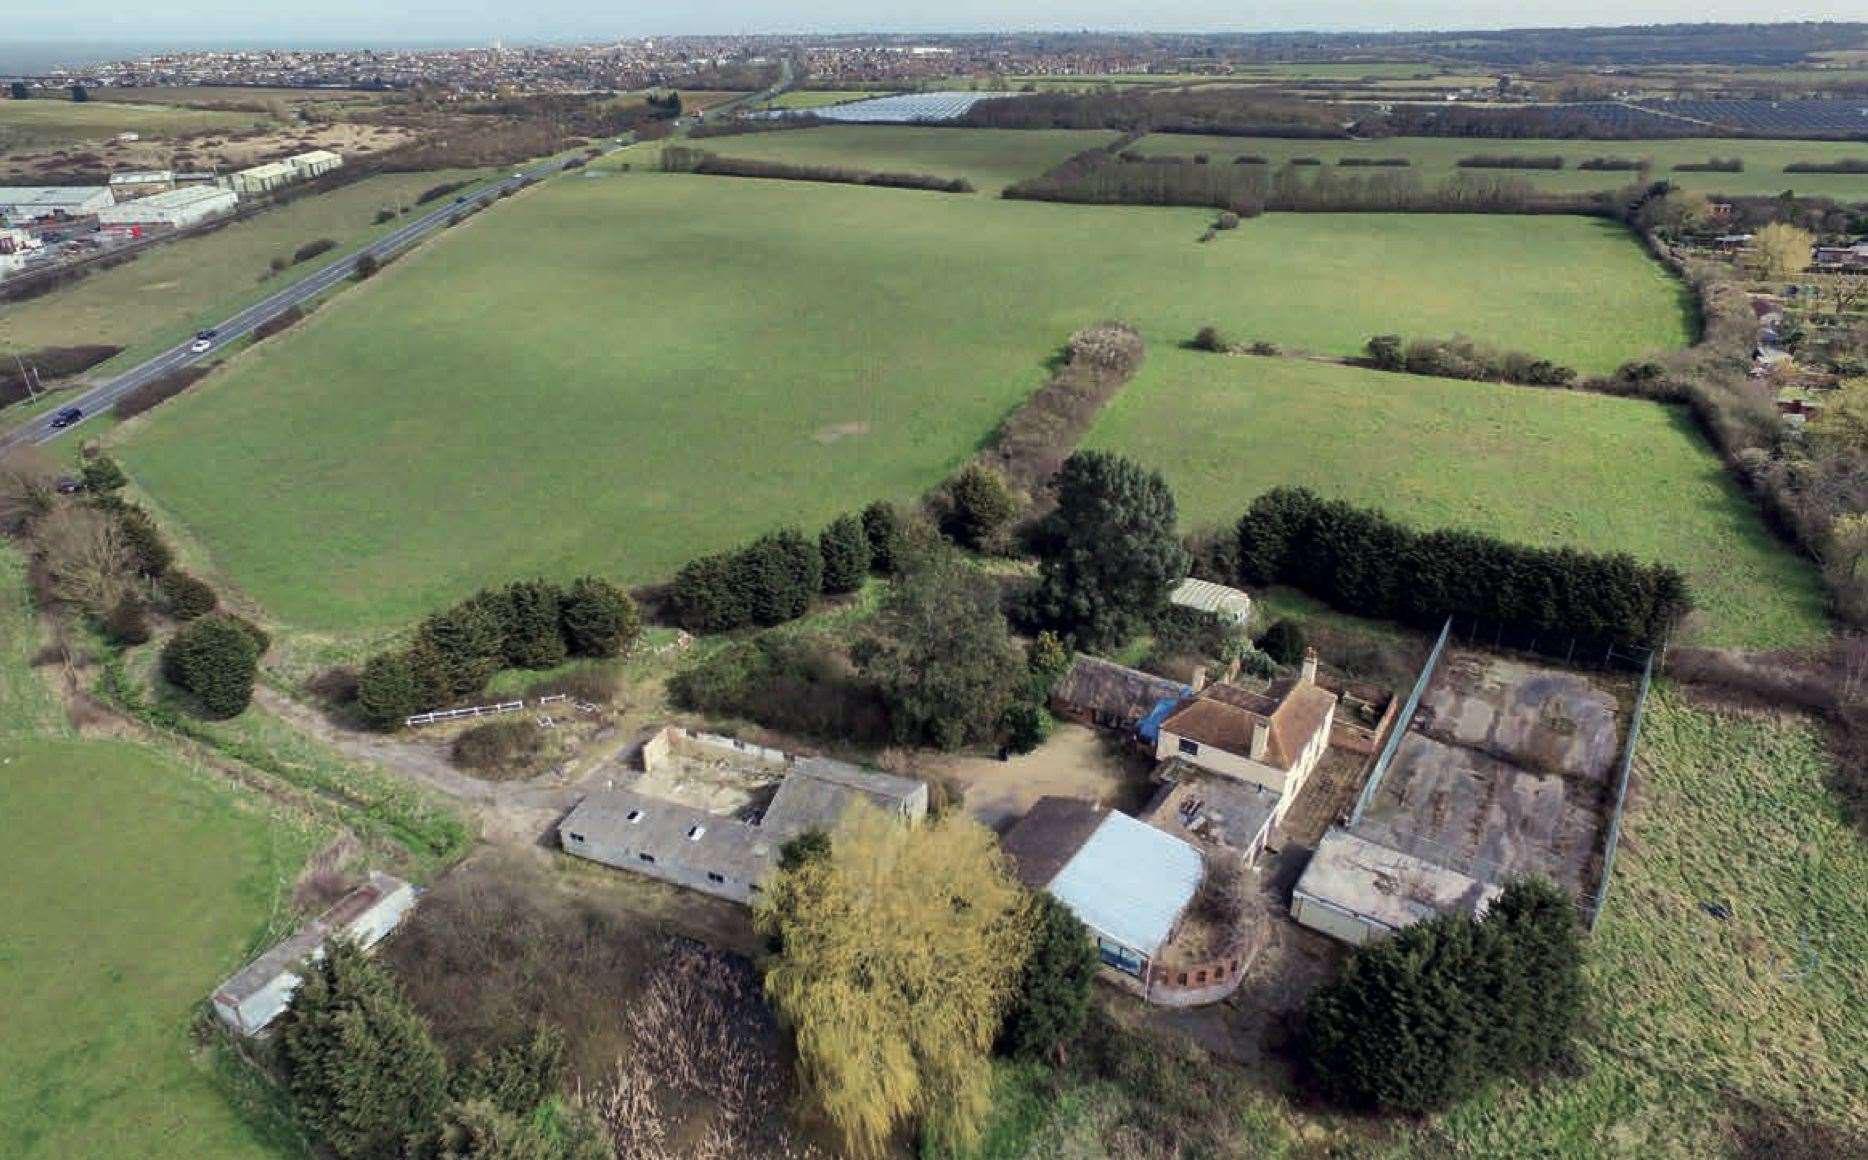 The 65-acre site at Bodkin Farm, Chestfield, could host 300 homes and a new secondary school. Picture: Strutt & Parker